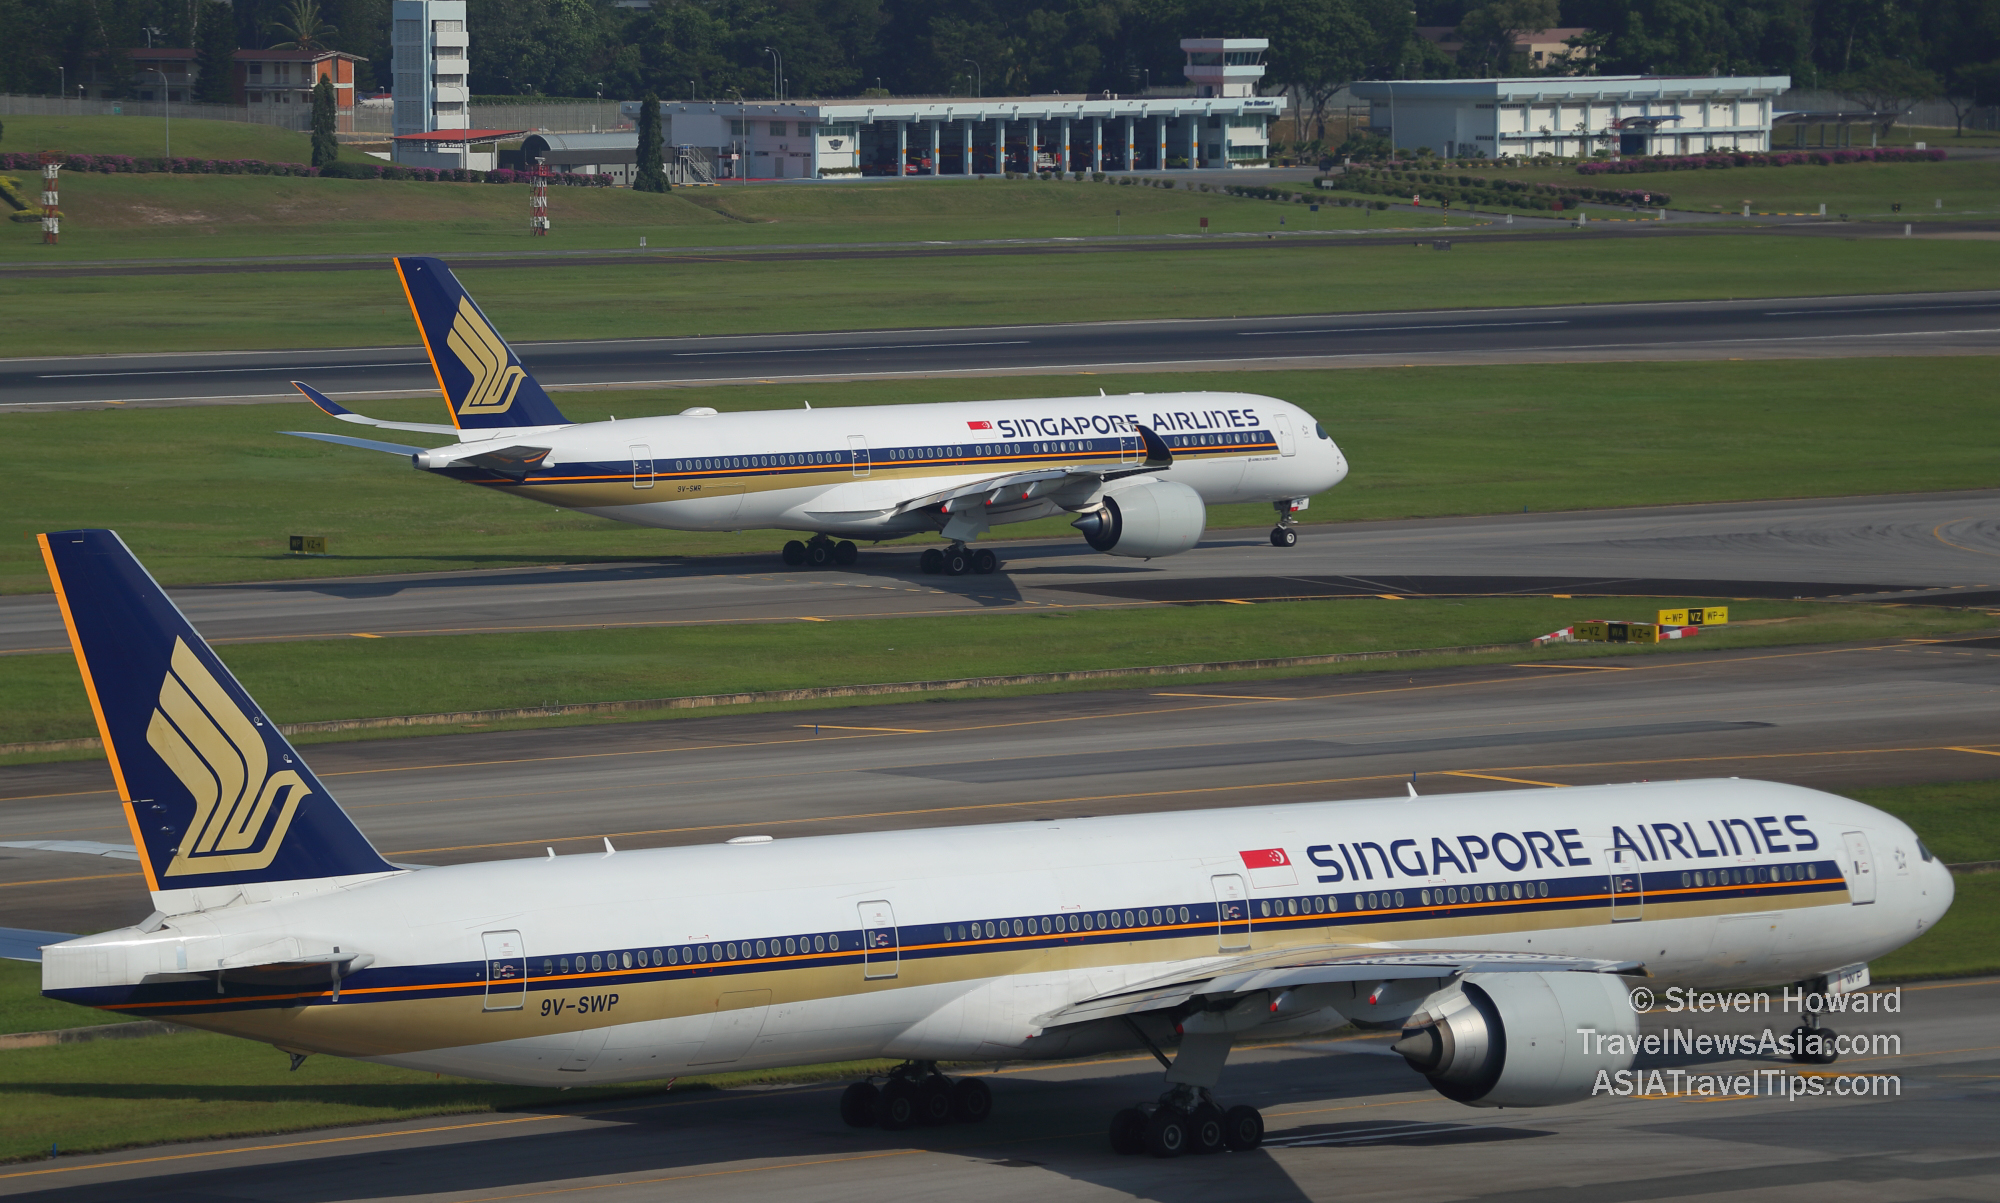 Singapore Airlines Boeing 777 reg: 9V-SWP in the foreground with a Singapore Airlines Airbus A350-900 reg: 9V-SMR in the background. Picture by Steven Howard of TravelNewsAsia.com Click to enlarge.